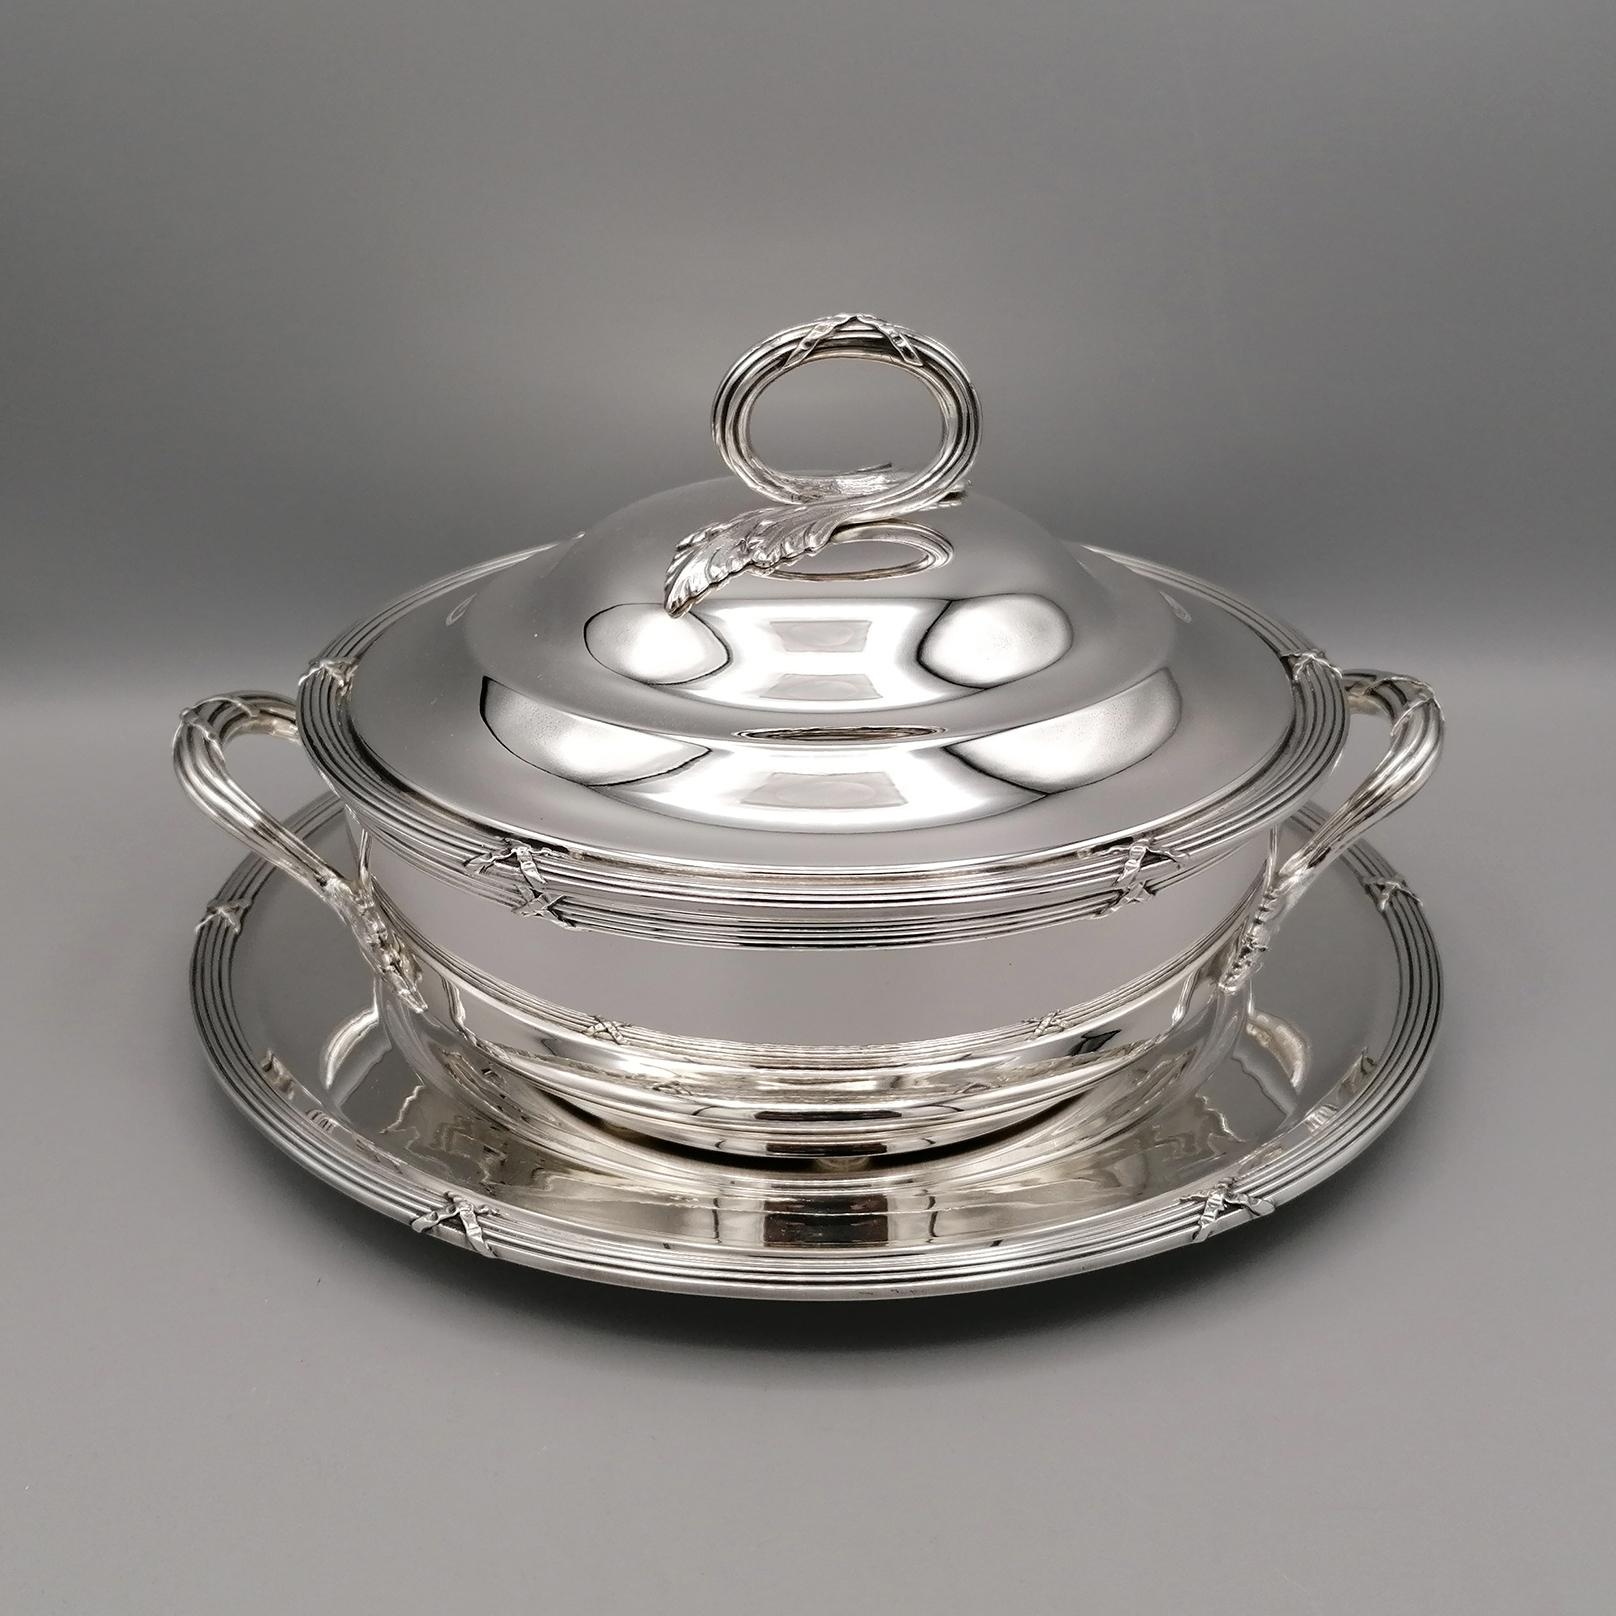 Elegant hand made sterling silver entree with dish 
The welded edge with Reed & Ribbon characterizes the Classic Luis XVI style.

The Louis XVI-era Reed & Ribbon collection features elegantly proportioned bundles of reed bound by crossed ribbons,